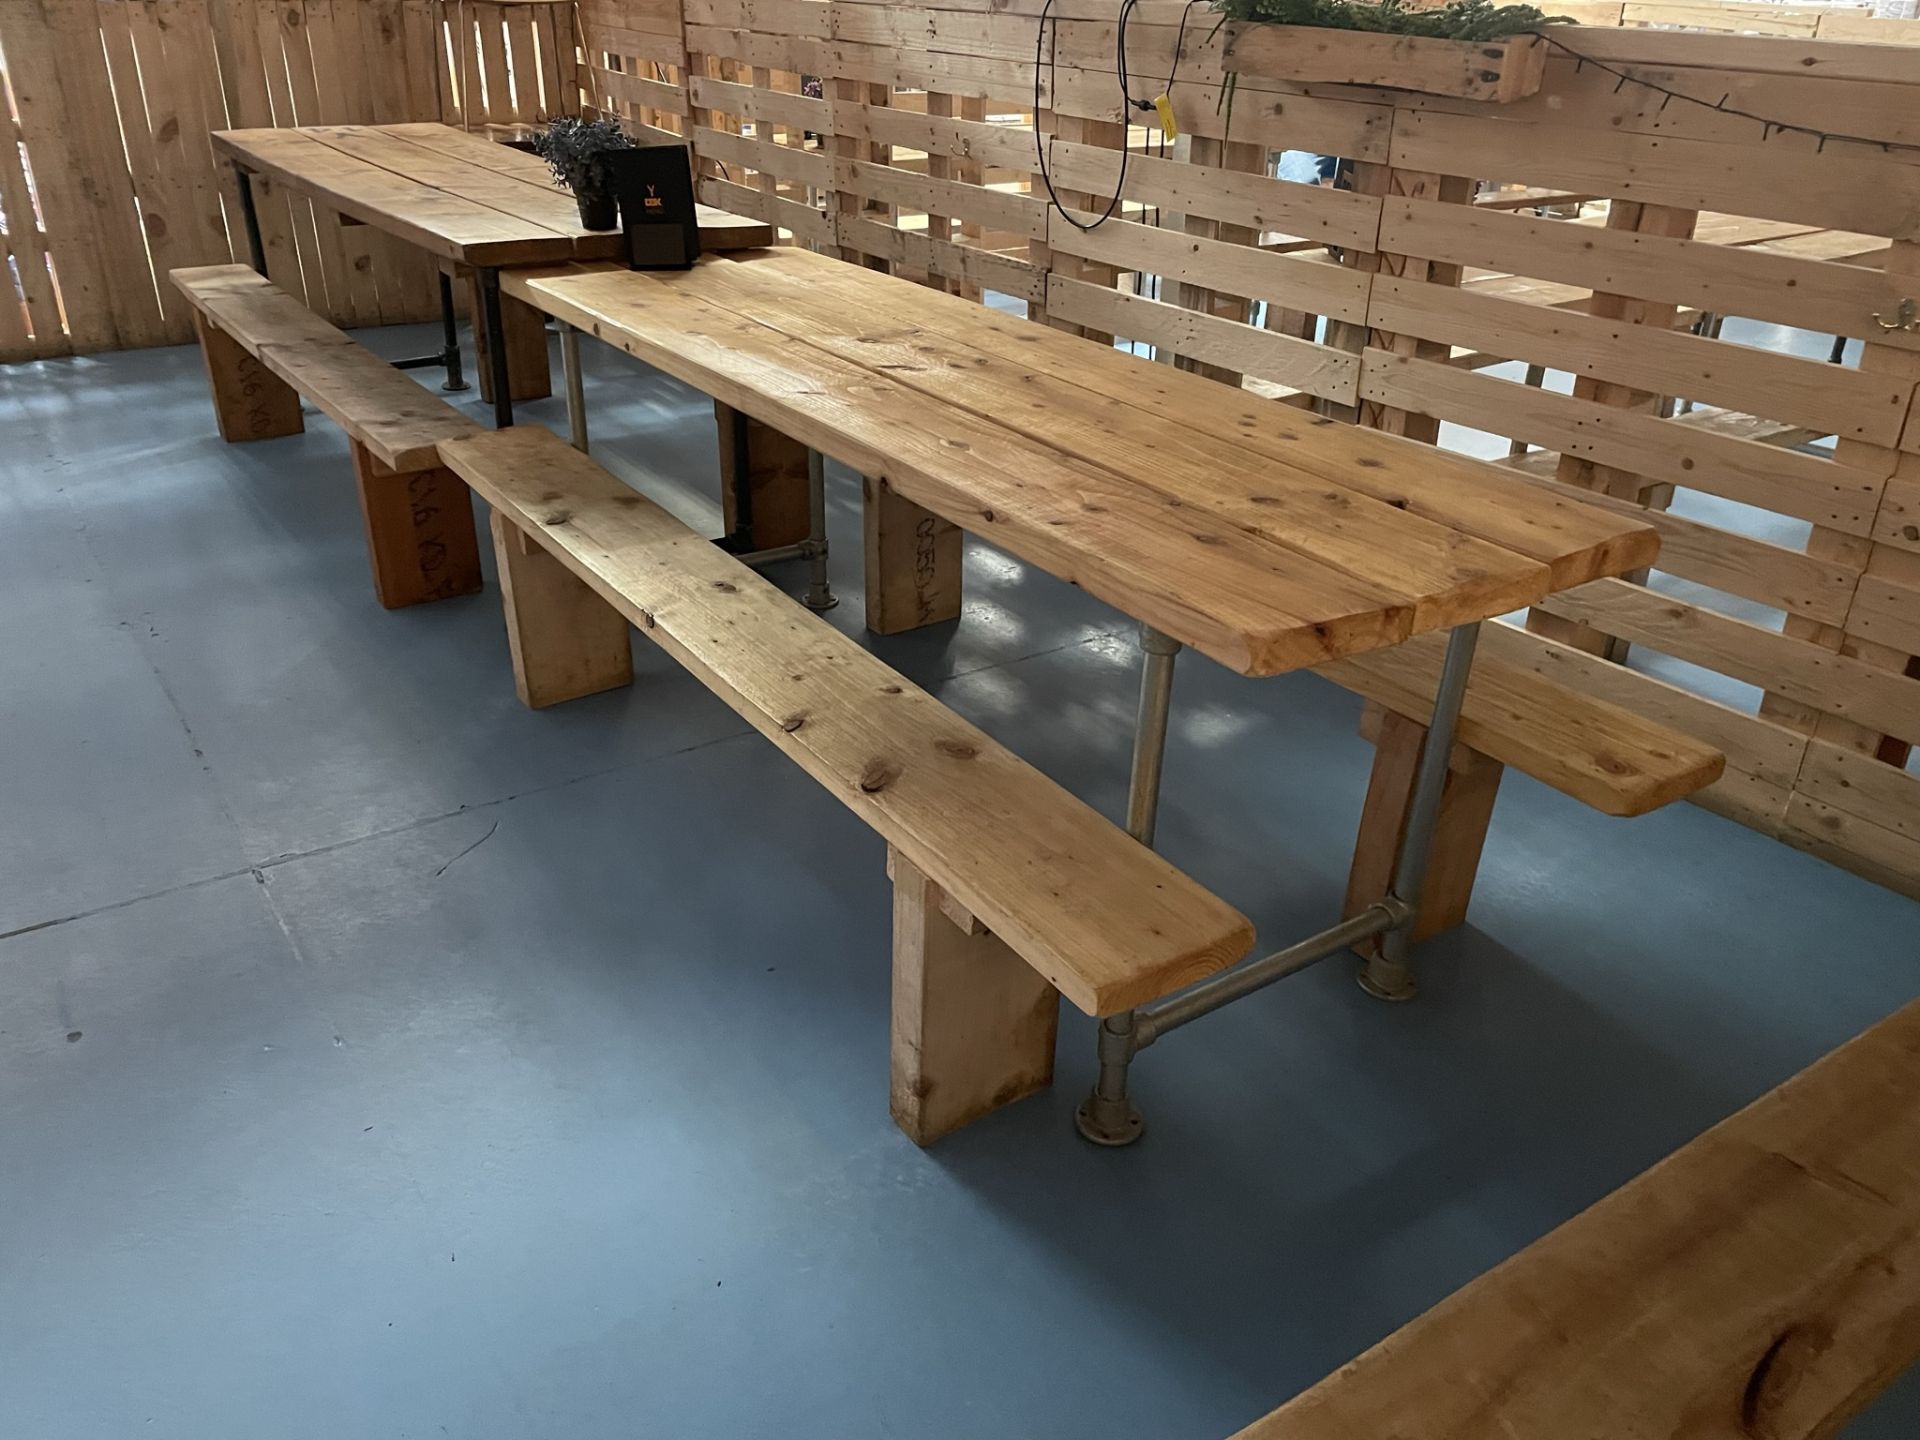 6 x Wooden Dining Tables w/ Metal Frames & 12 x Wooden Seating Benches - Image 6 of 6